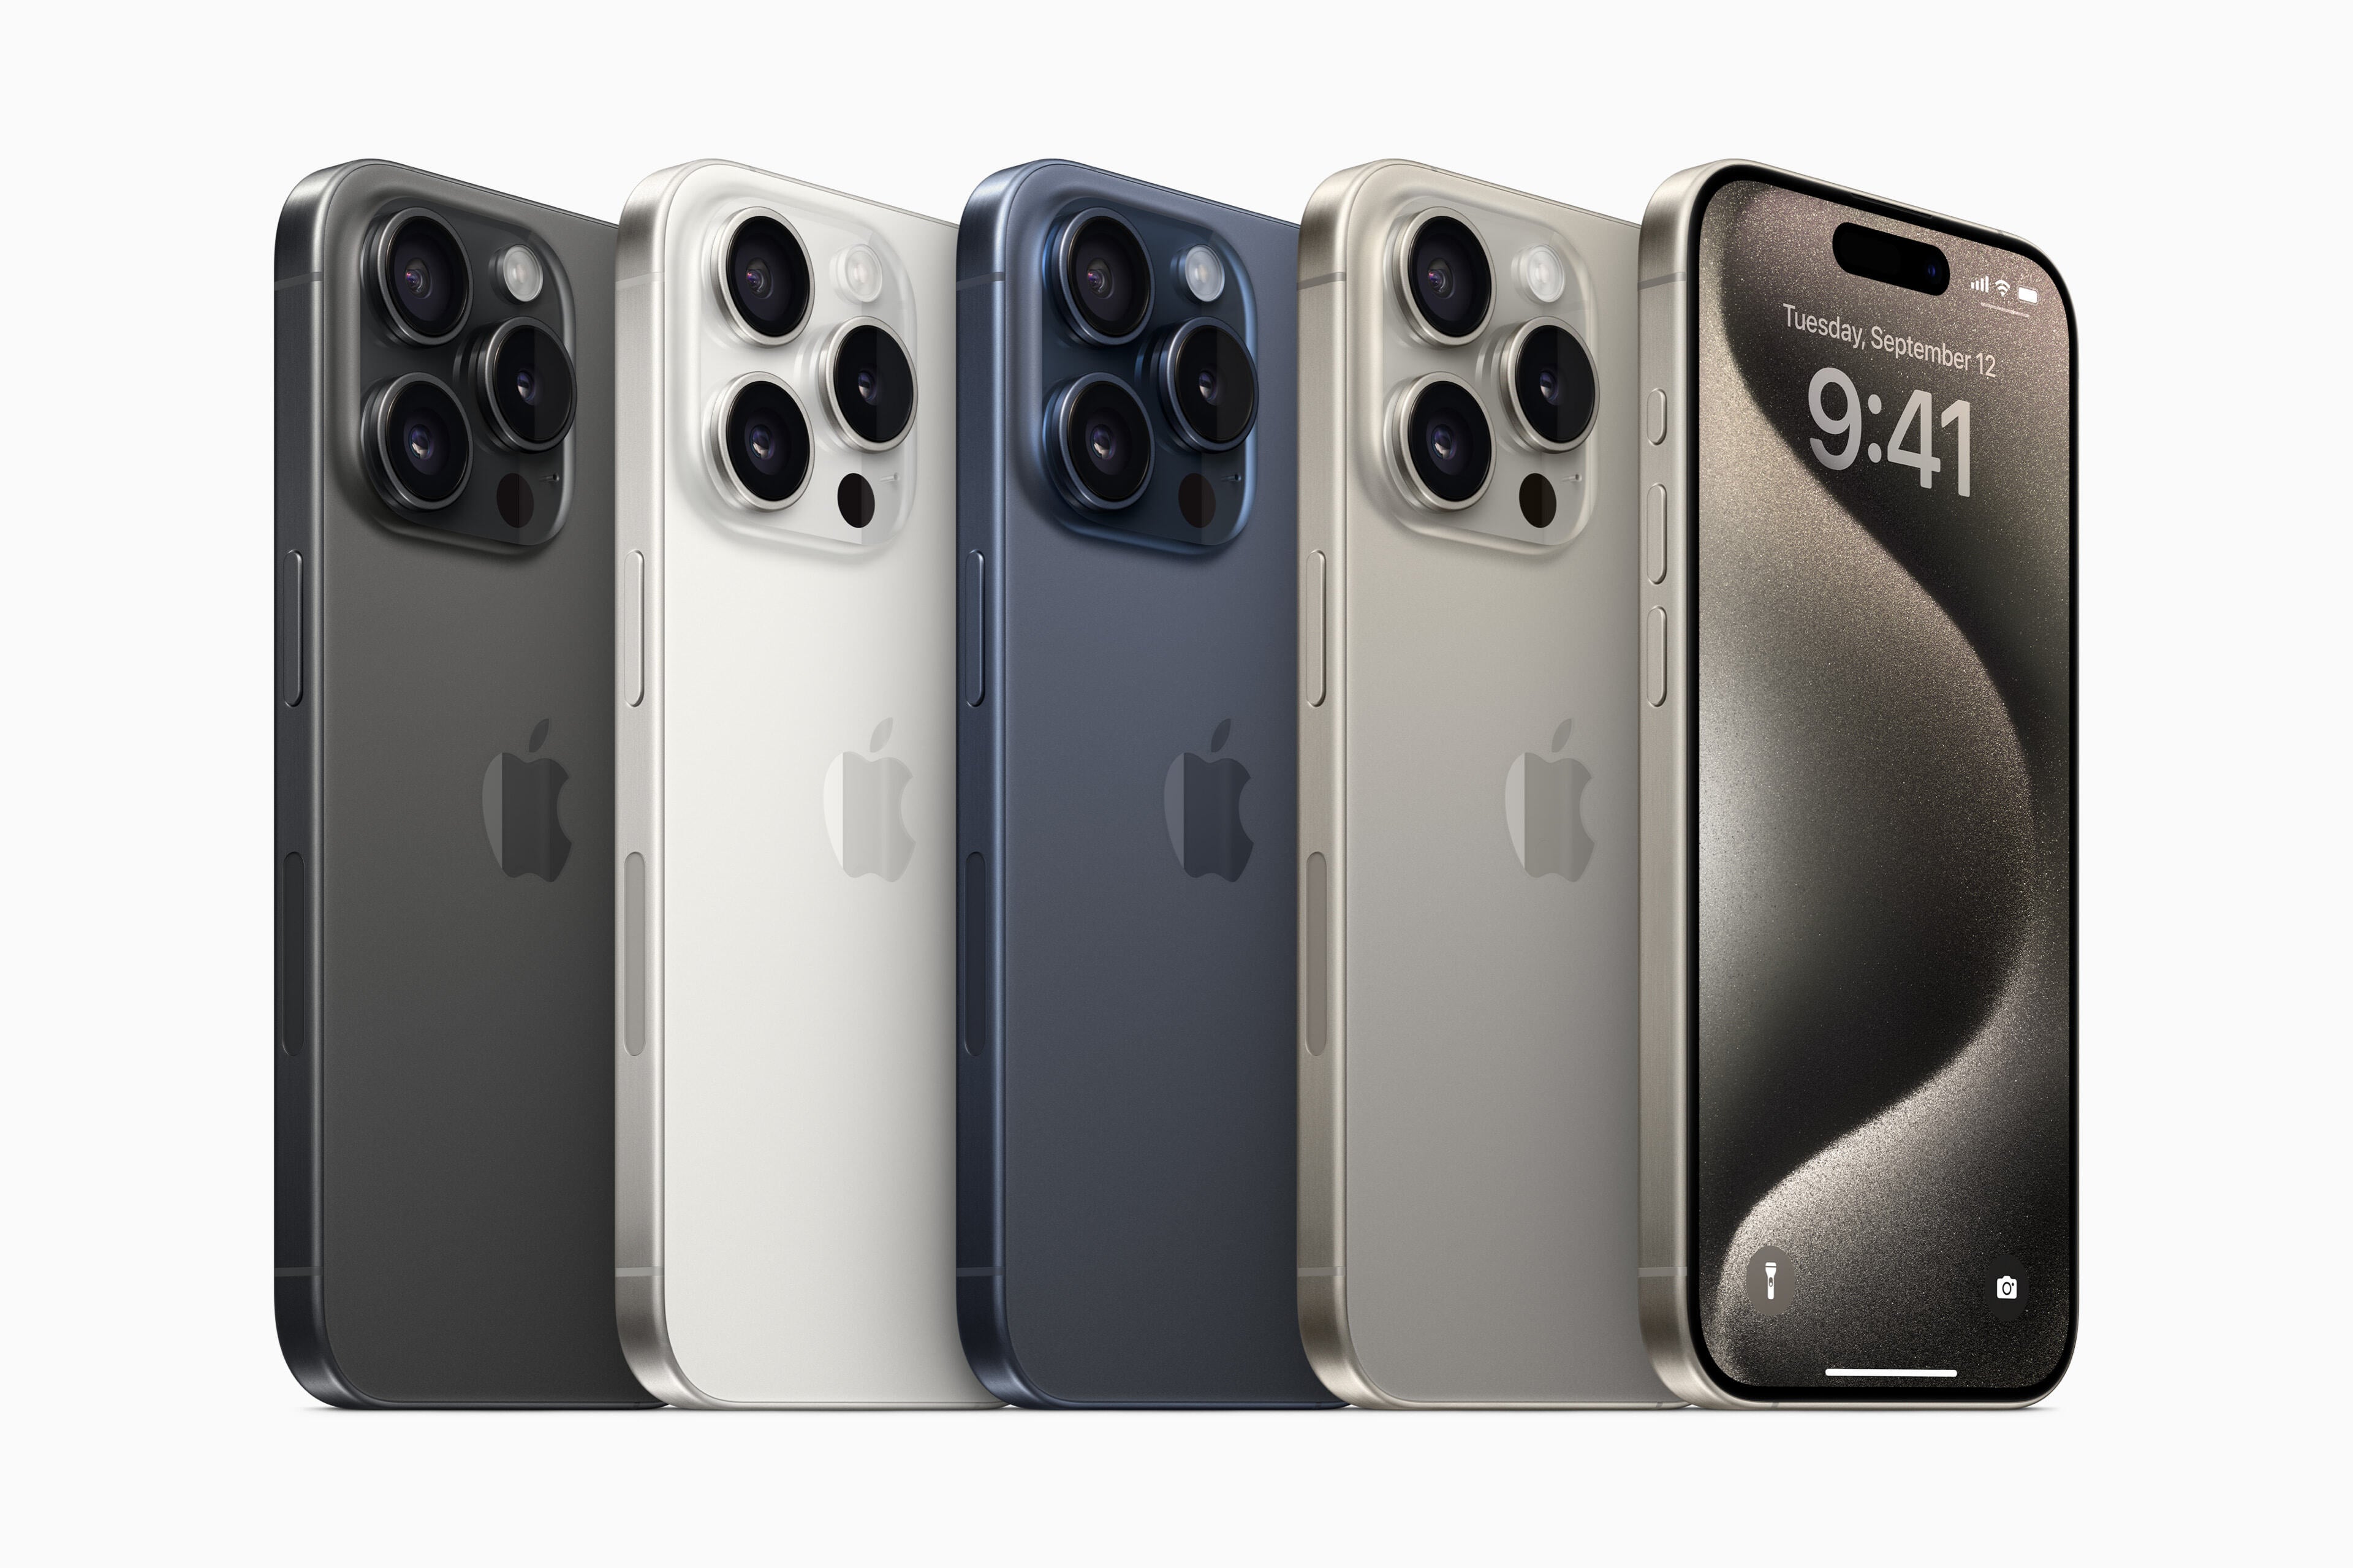 iPhone 15 Pro/Pro Max color options - Apple iPhone 15 release date, price, and features